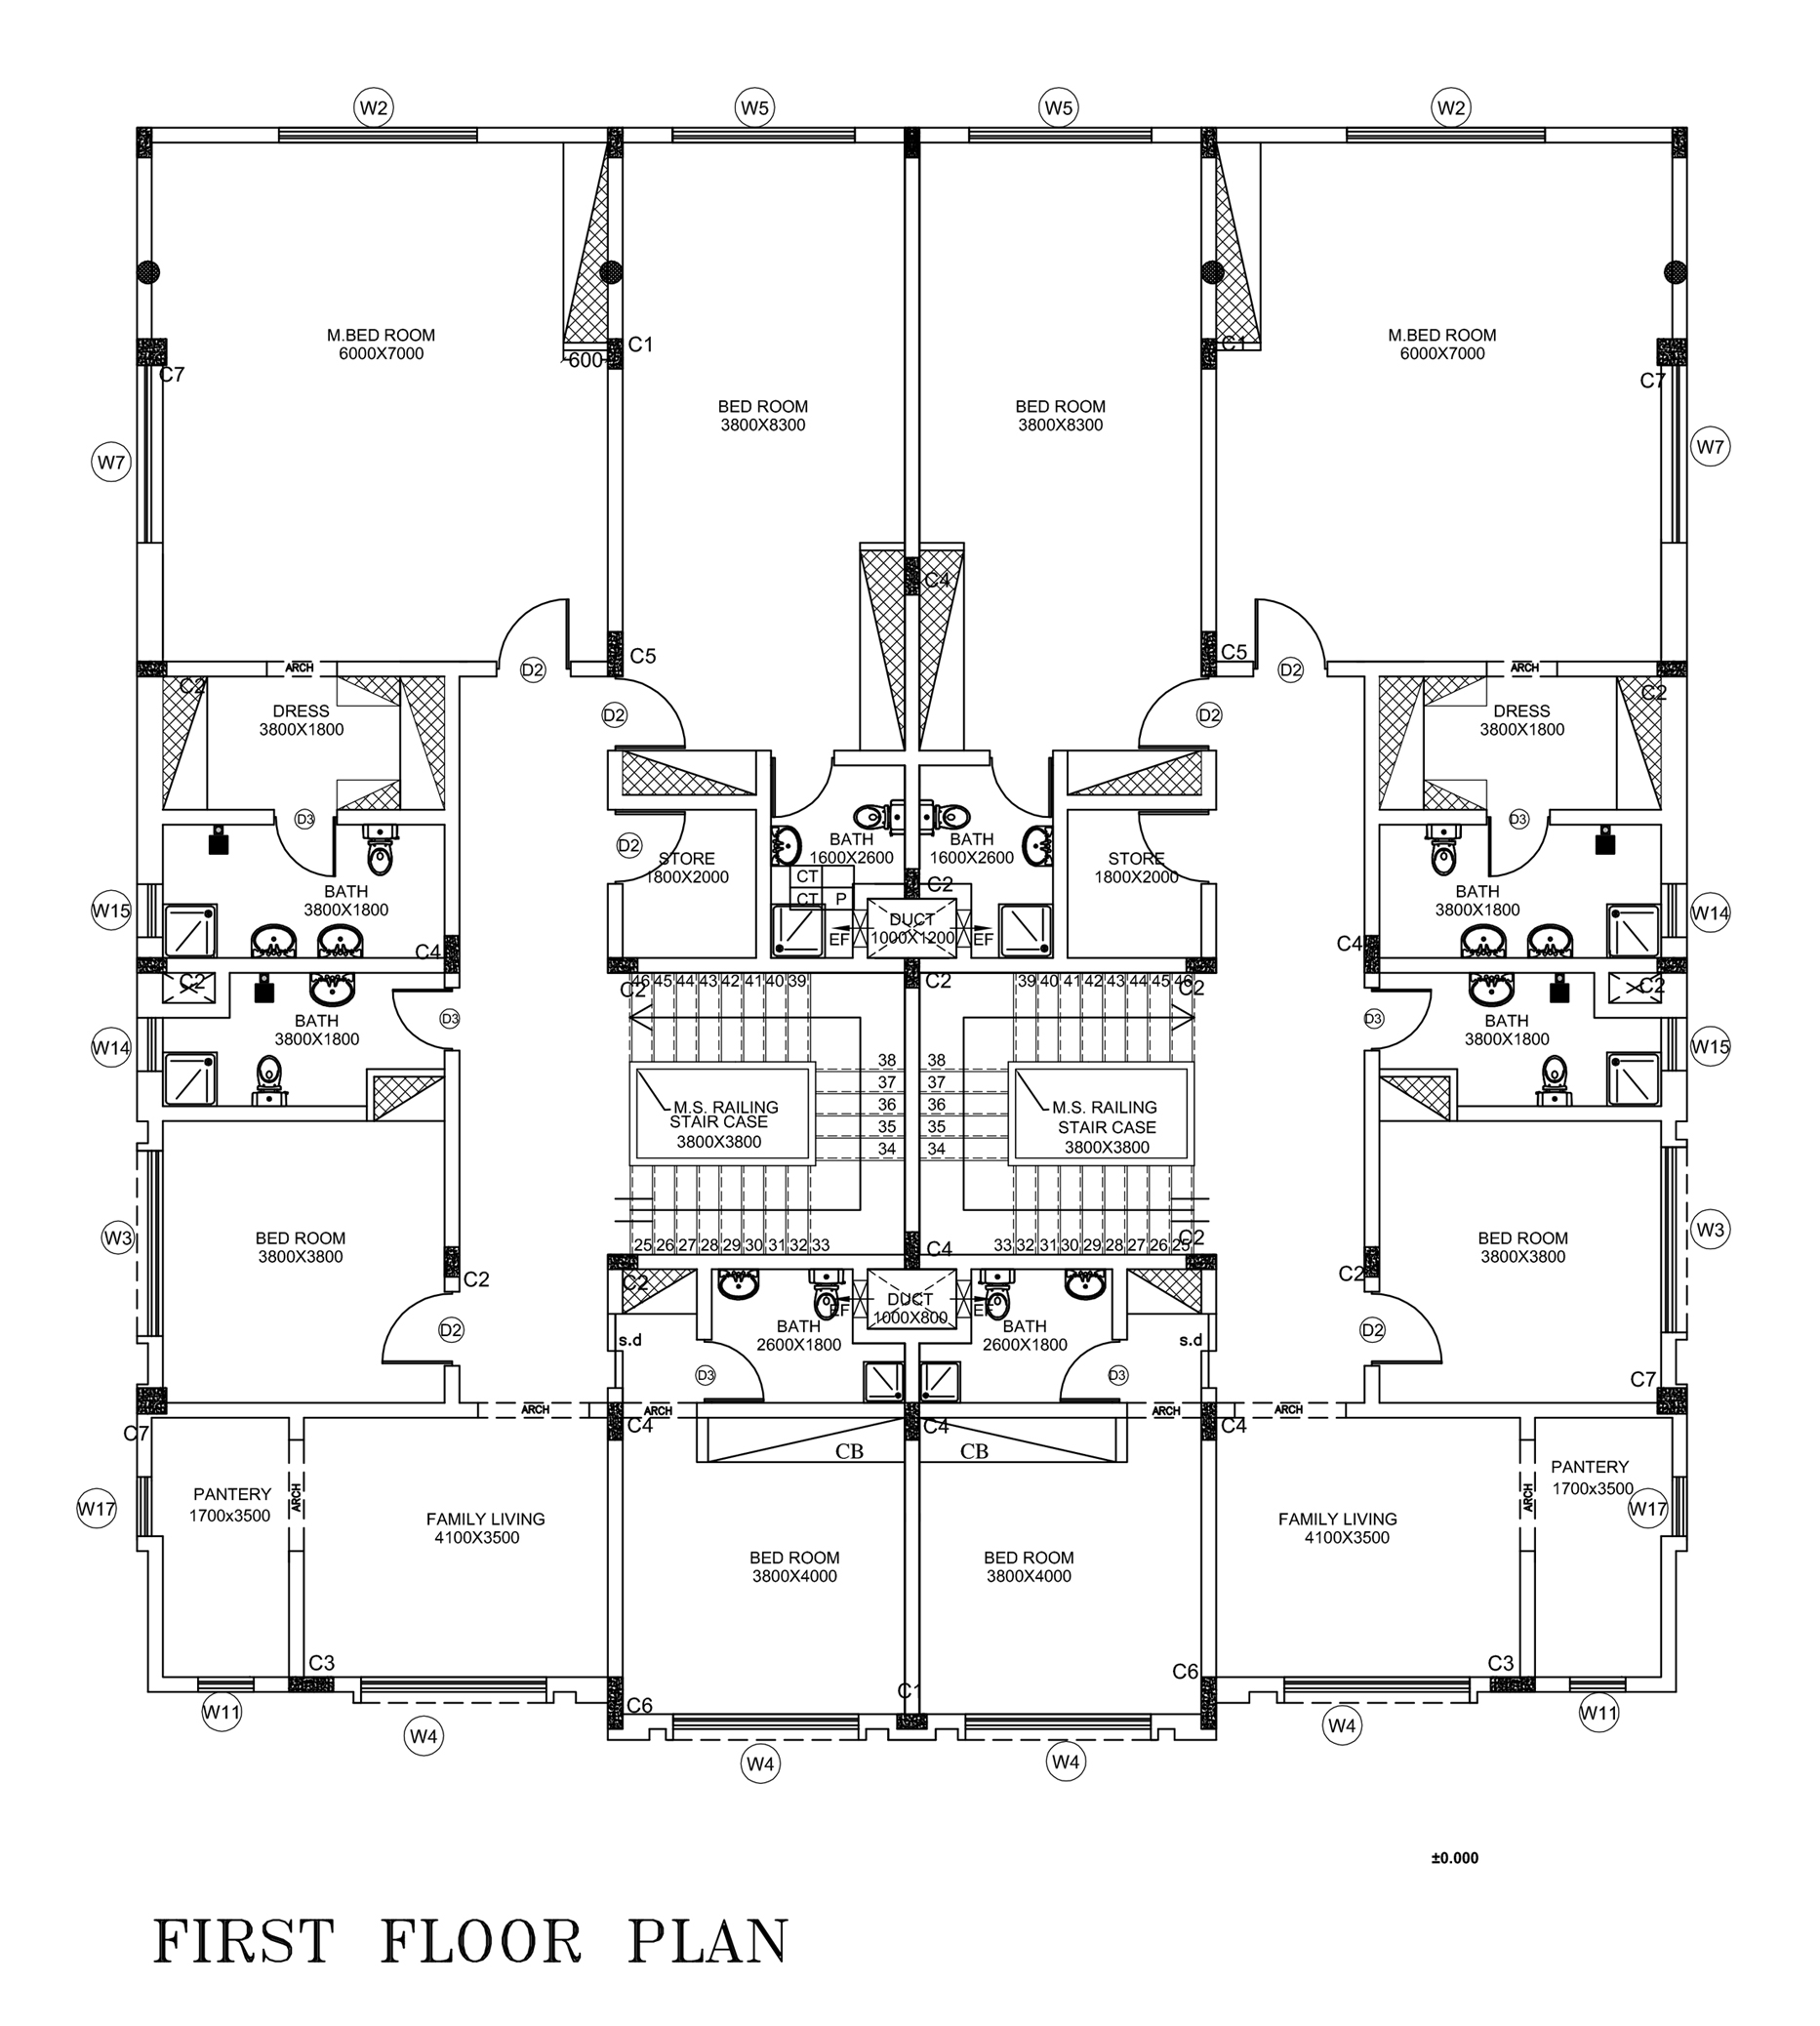 FIRST FLOOR PLAN FOR DOUBLE STORY TWIN VILLA